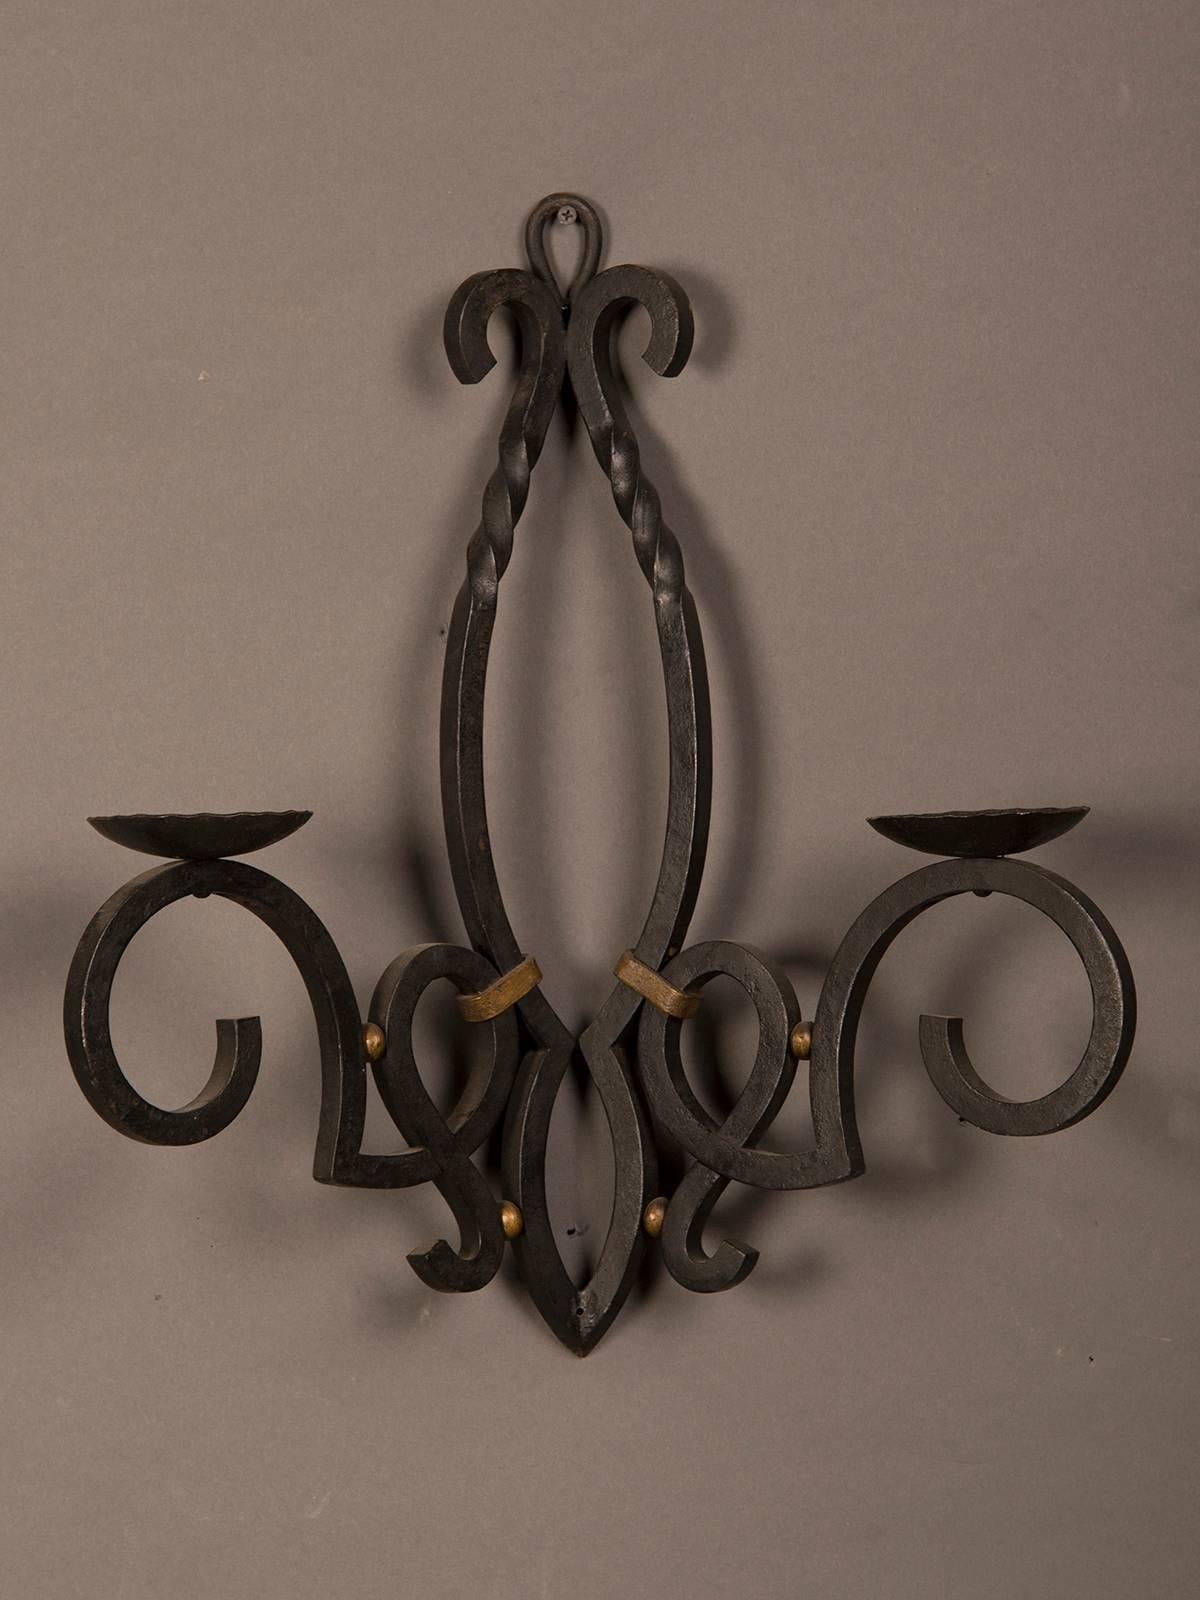 A massive vintage French hand-forged iron wall sconce with gilded highlights having a pair of candle cups ready to be electrified and mounted on a wall from France, circa 1940.